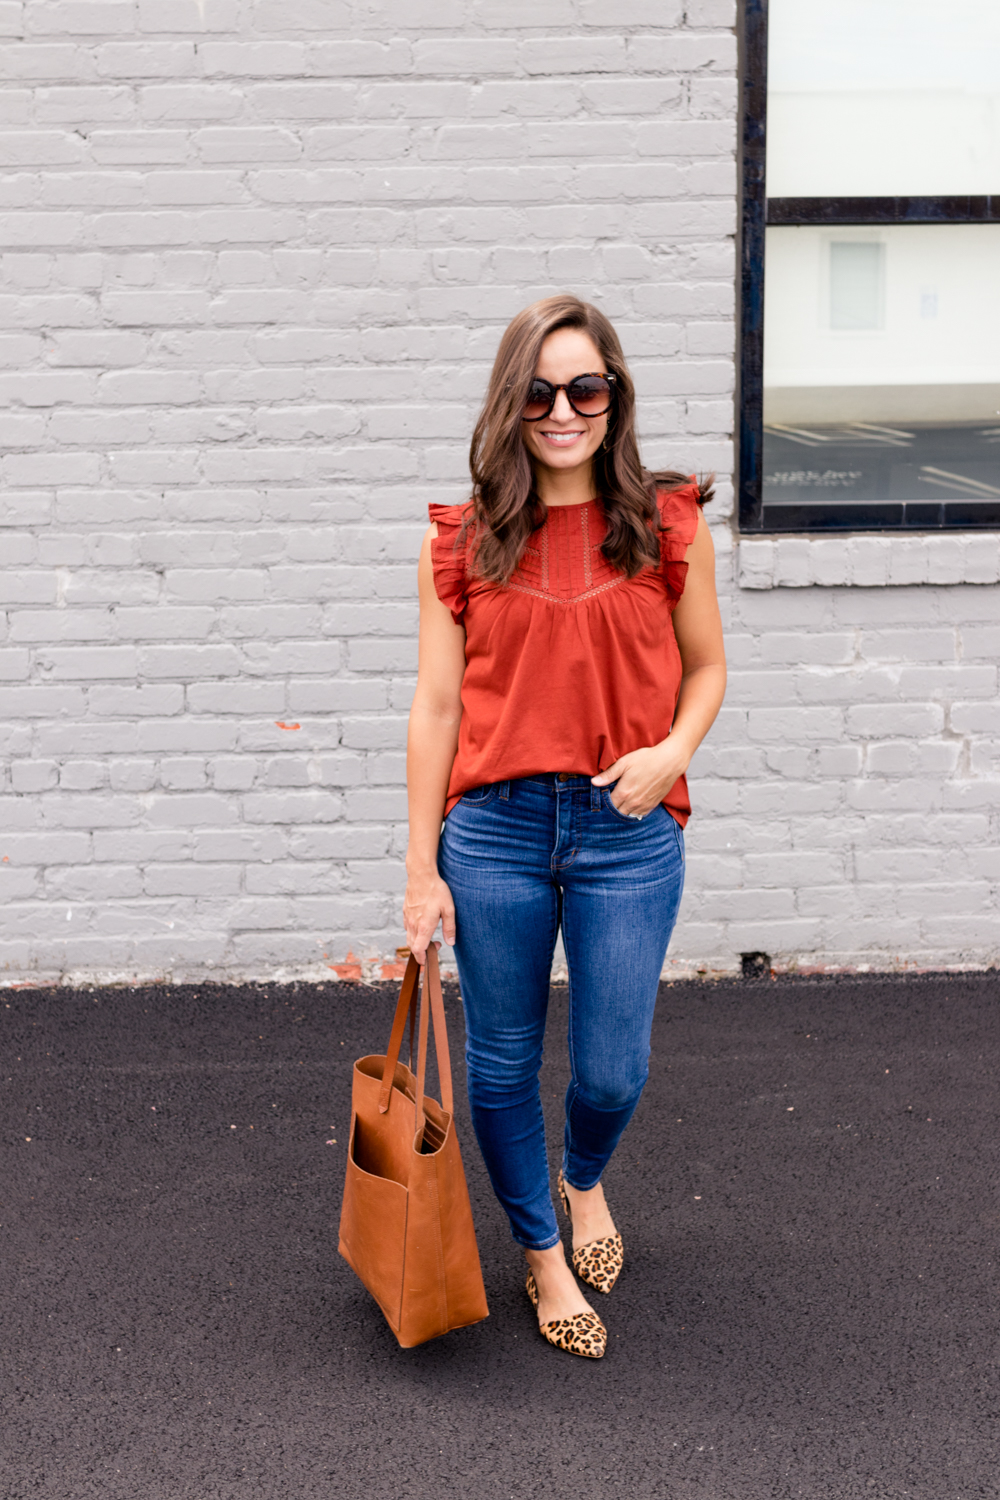 Jeans and Heels Outfit Idea - Doused in Pink